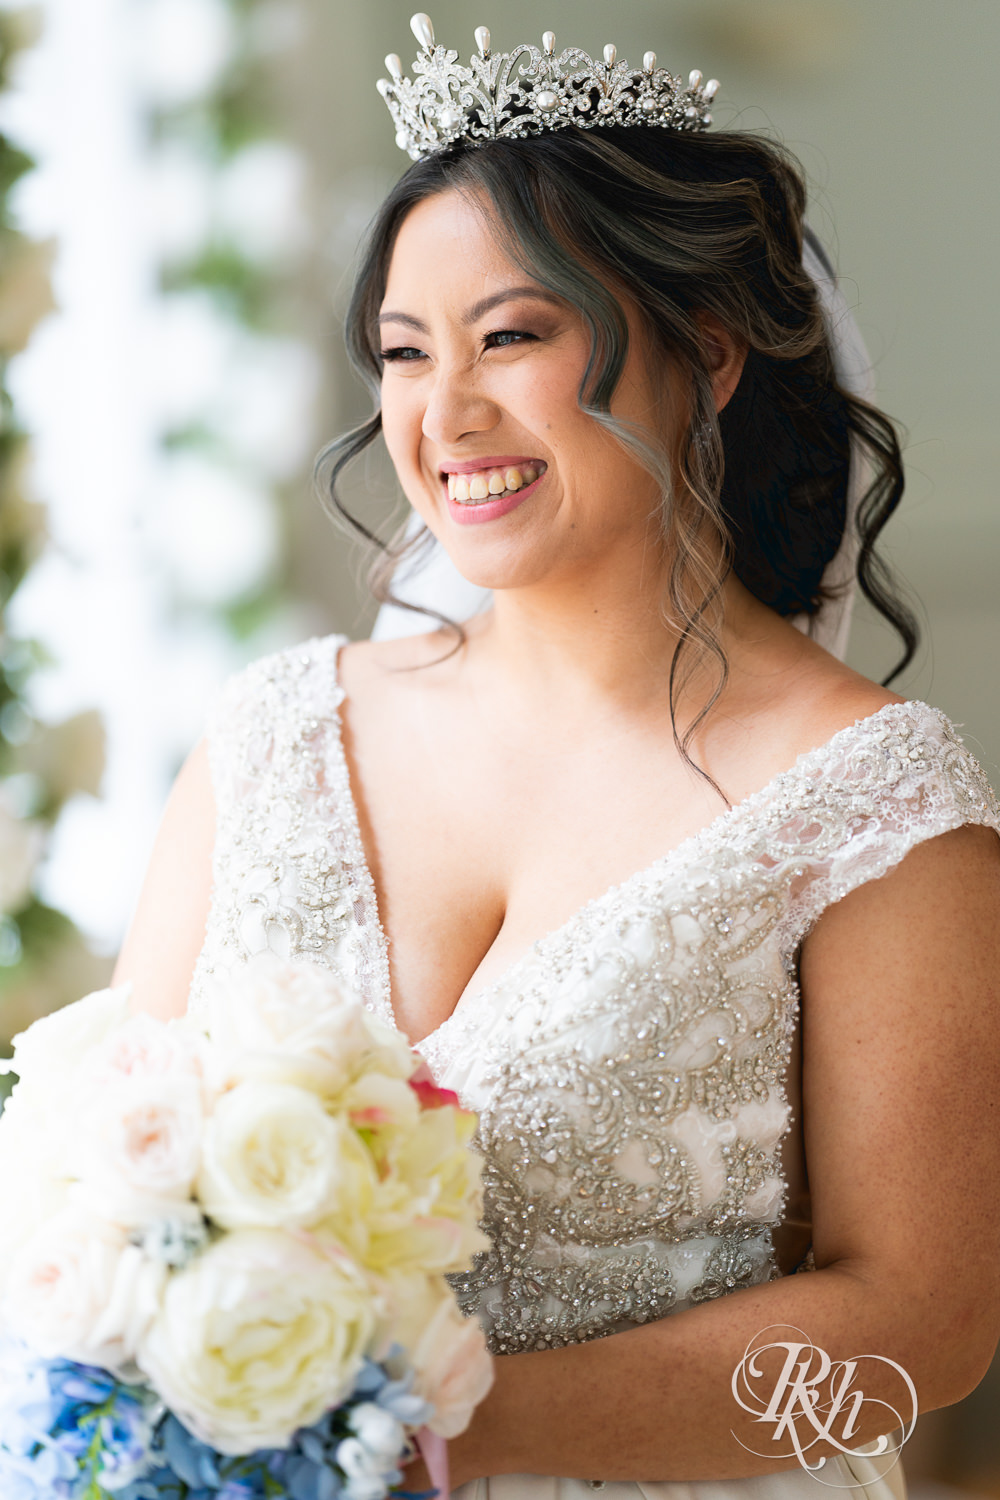 Hmong bride smiles on wedding day at the Saint Paul Athletic Club in Saint Paul, Minnesota.